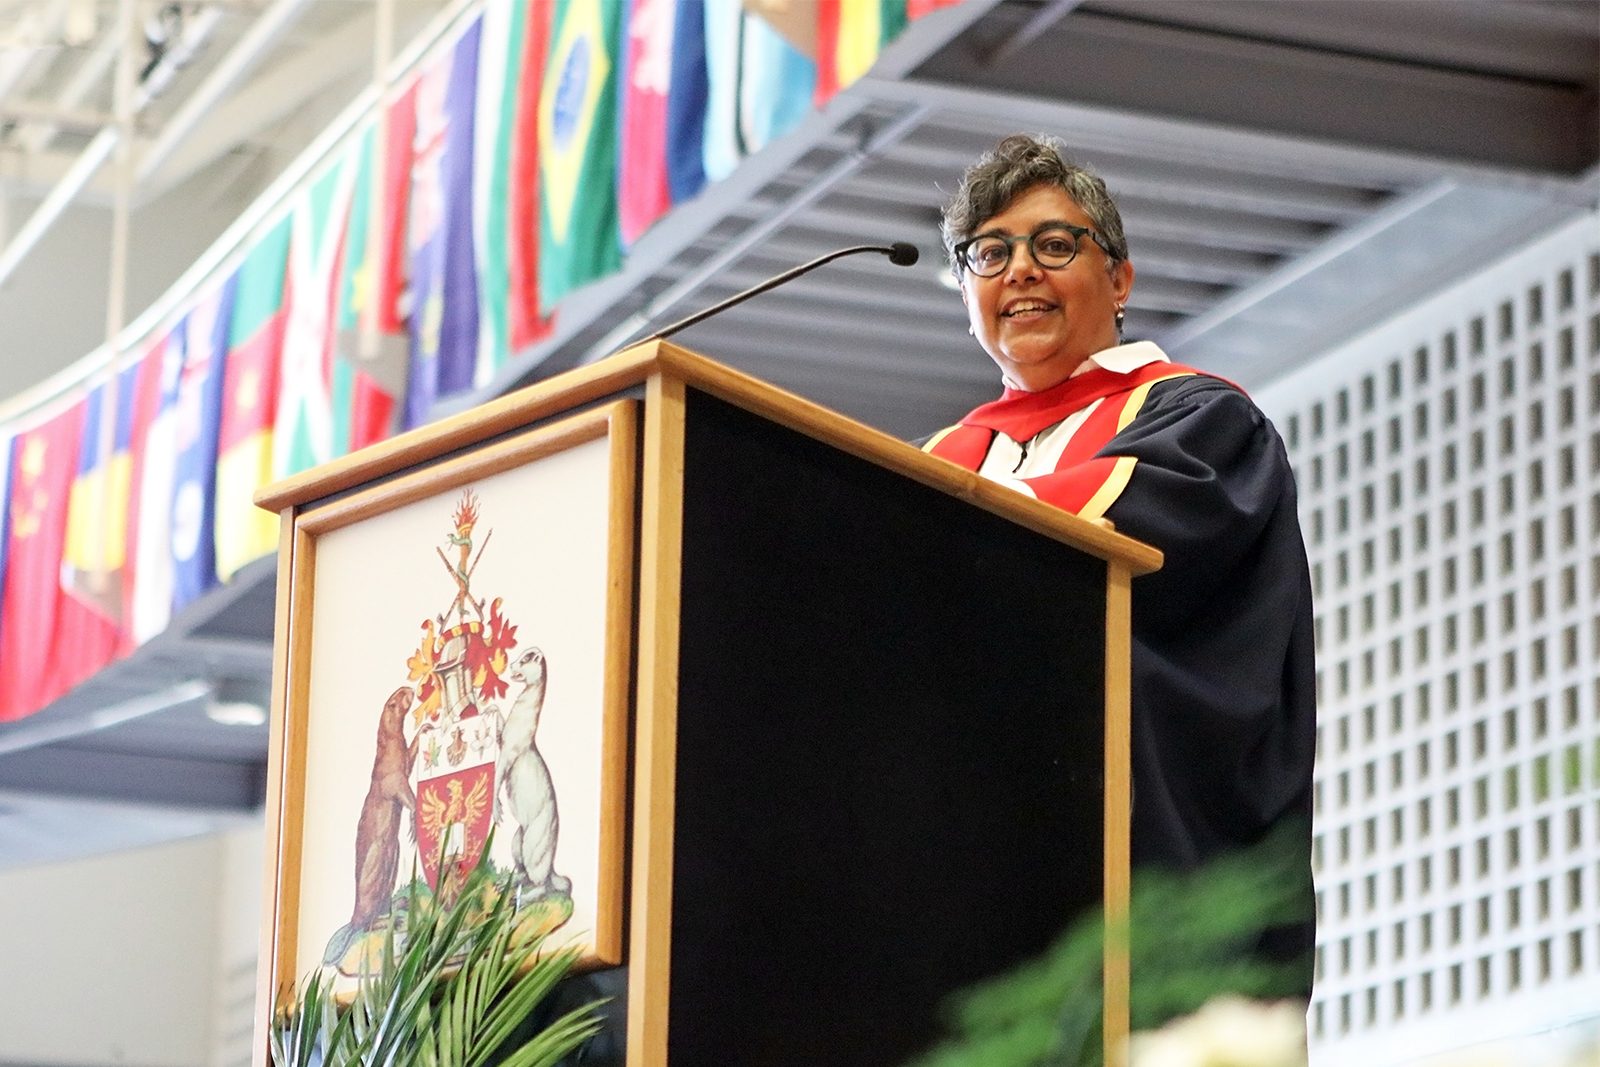 A woman in a graduation gown stands at a podium.